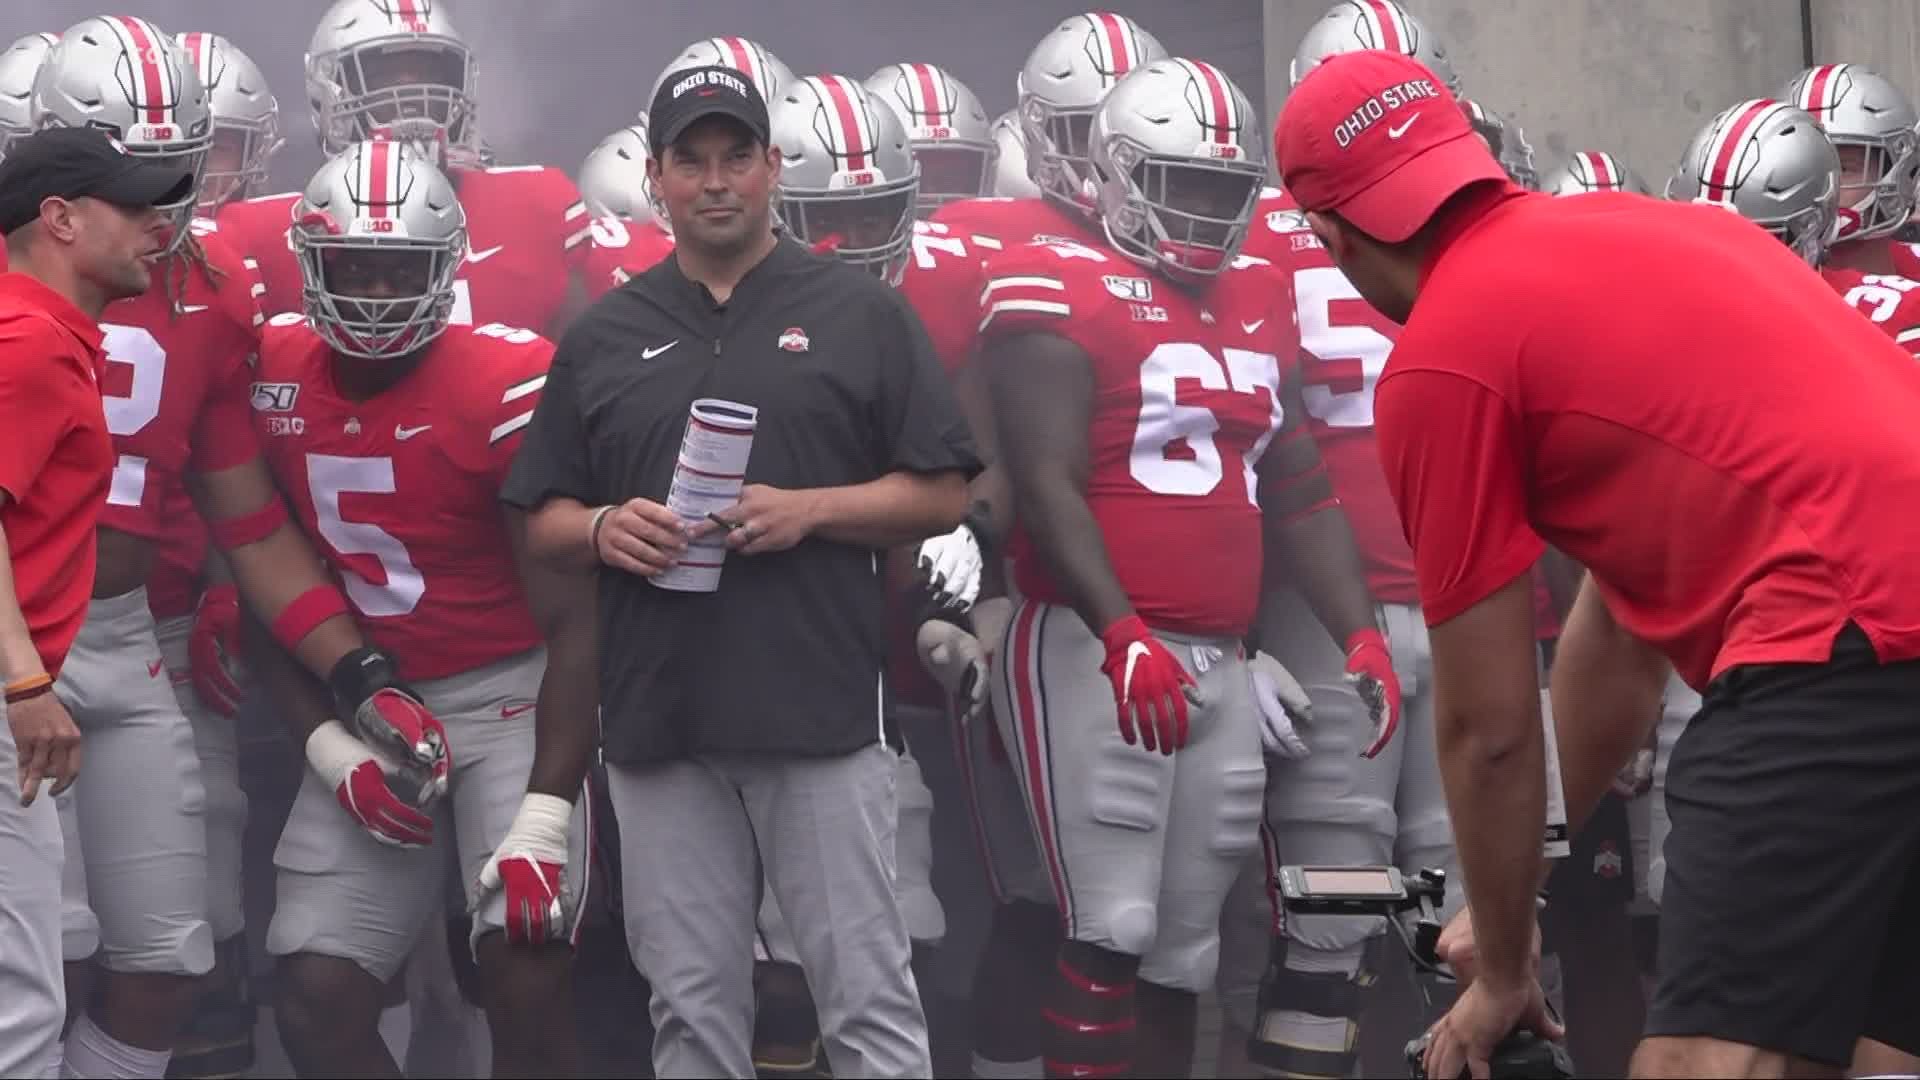 Ohio State head coach Ryan Day tests positive for COVID-19 